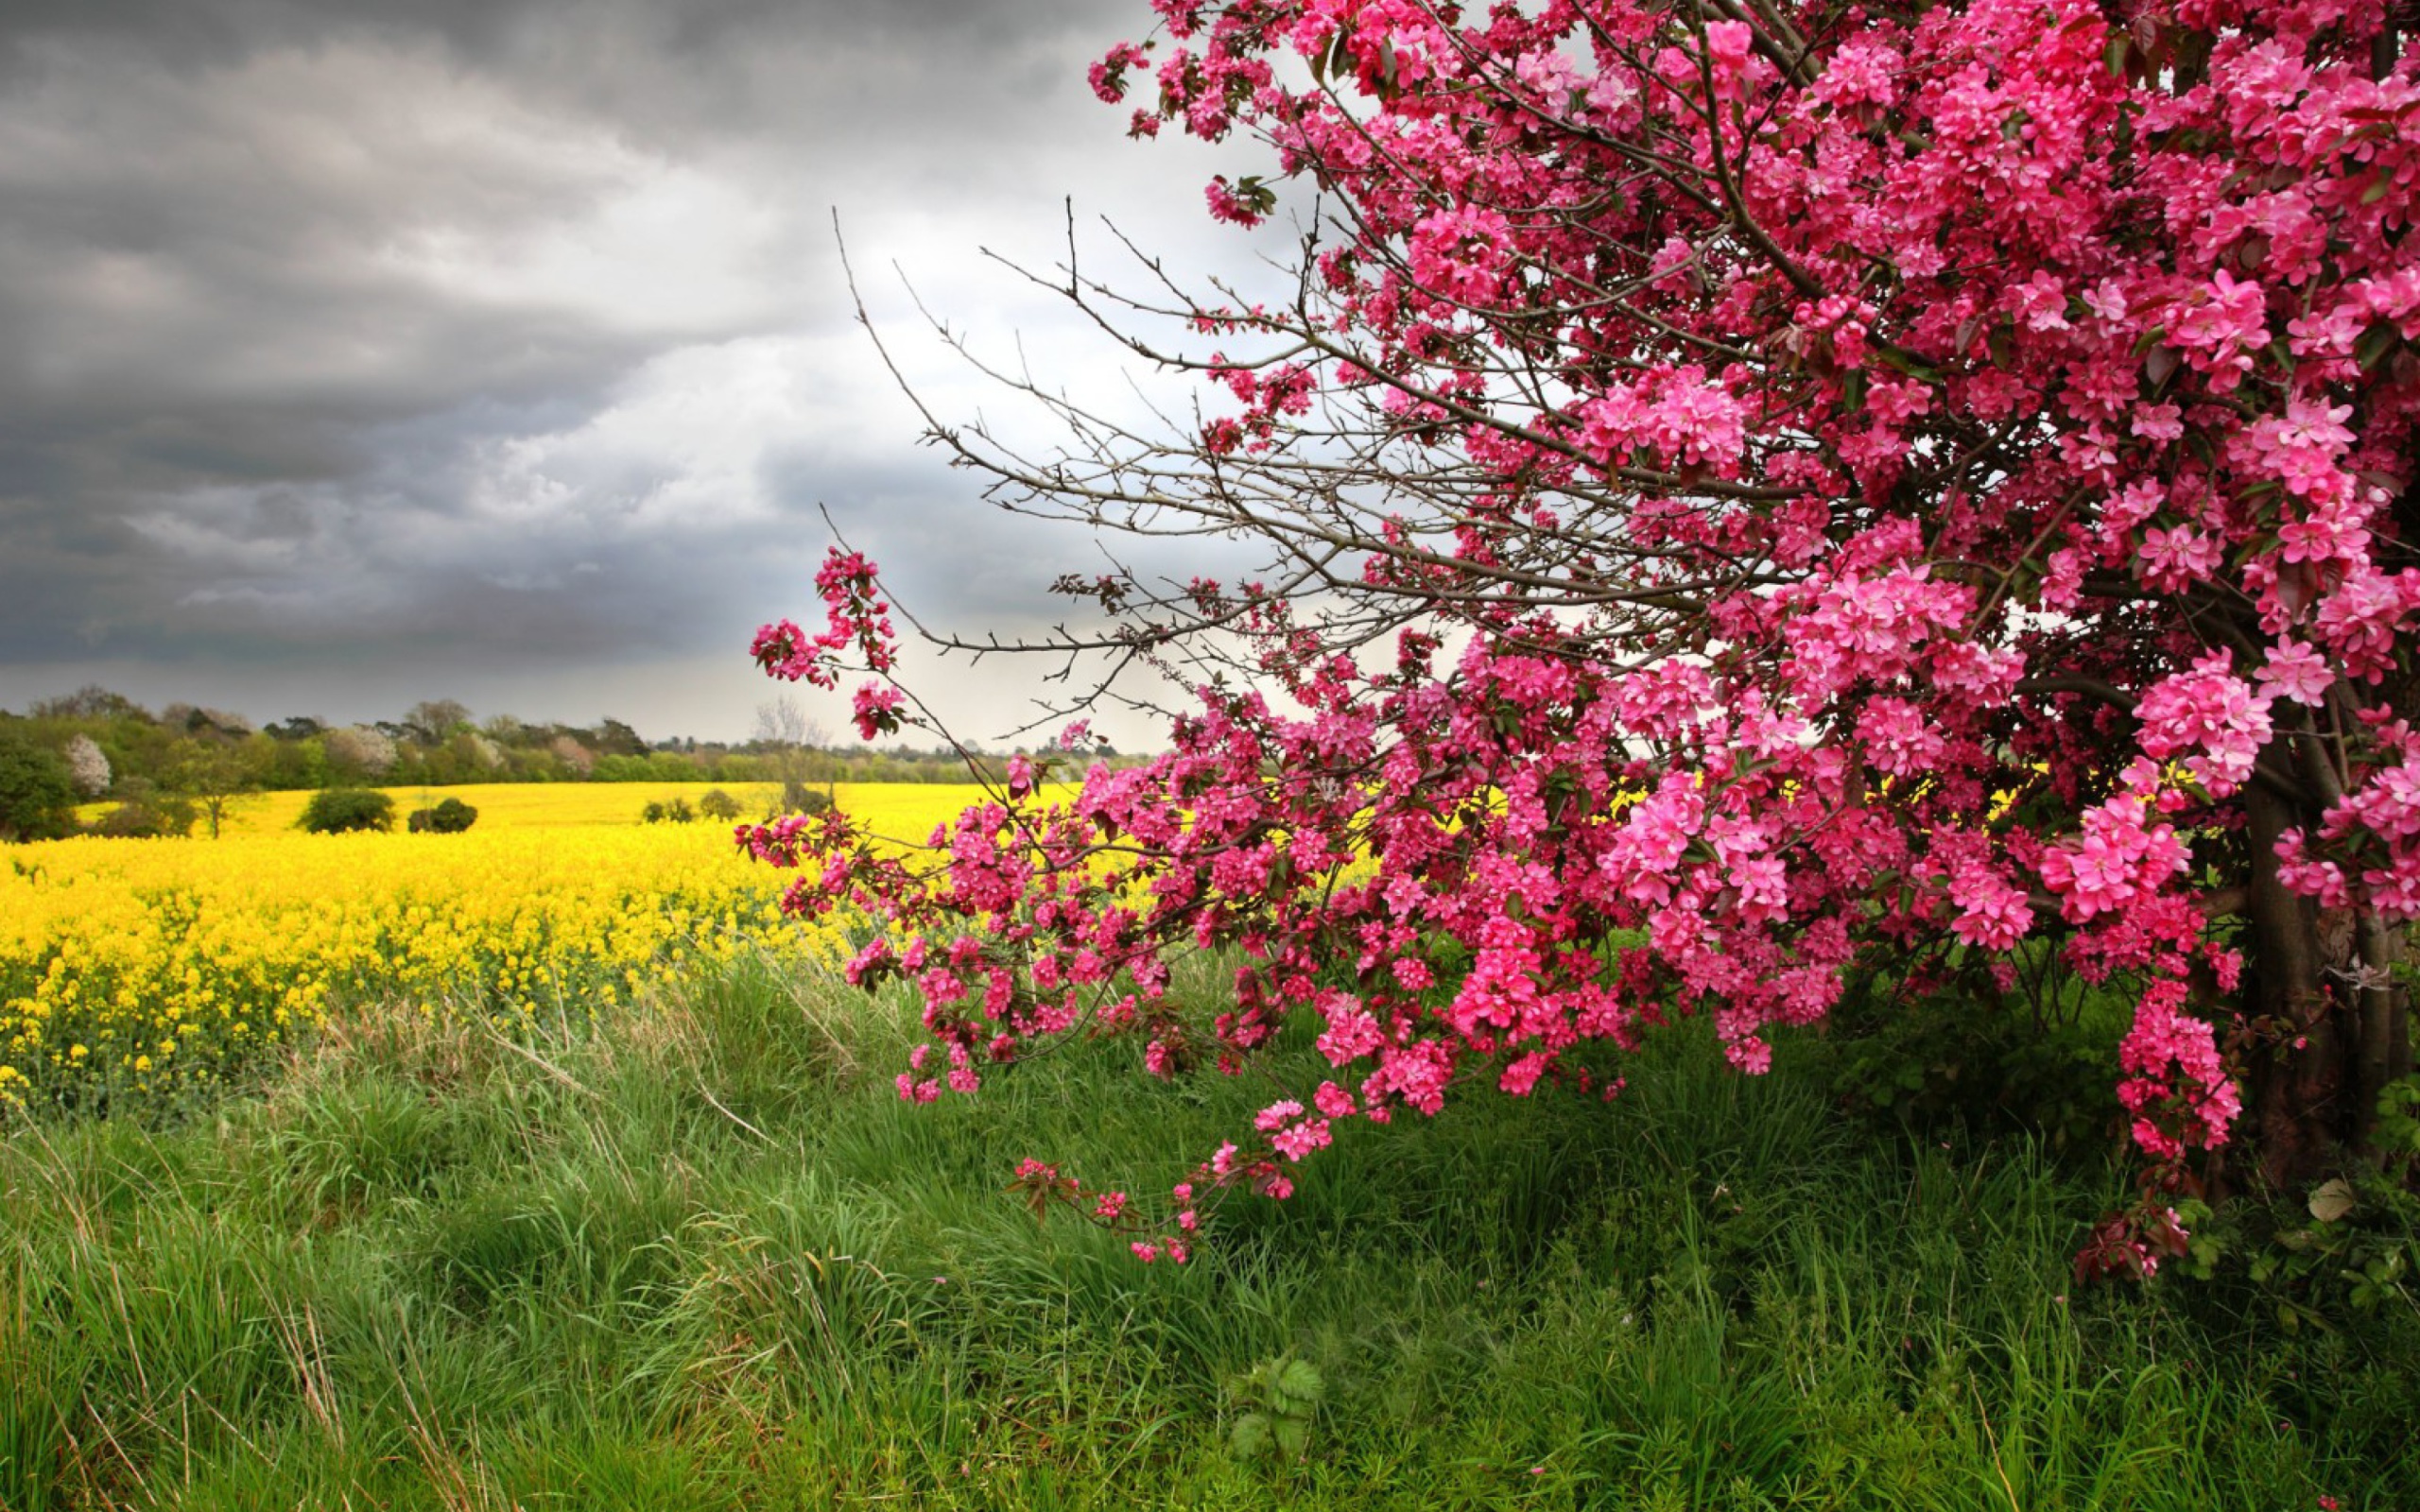 Yellow flowers, pink flowers, flowers, spring, trees, Nature, landscape